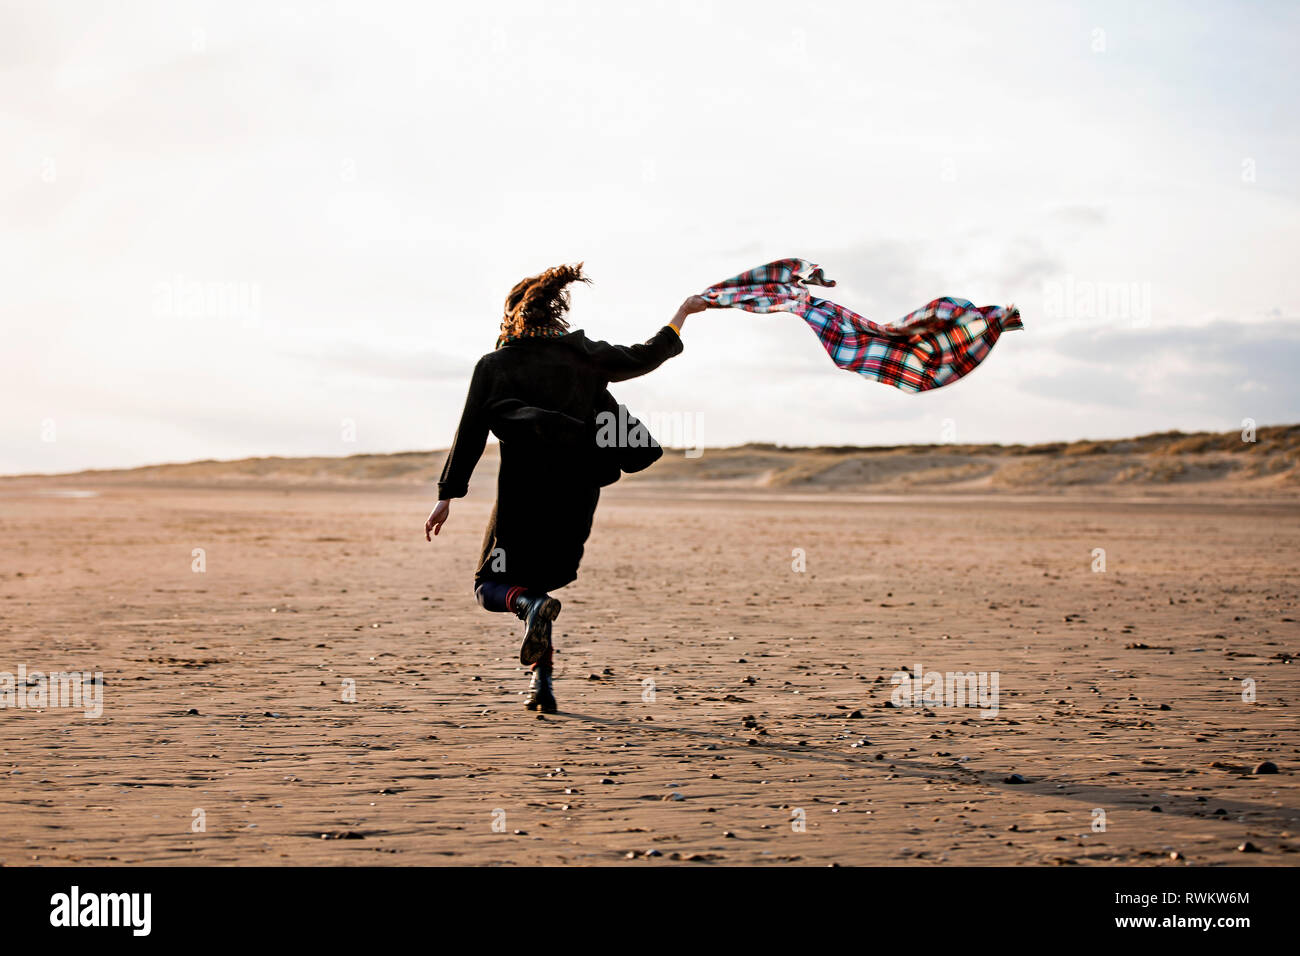 Woman running with beach blanket Banque D'Images